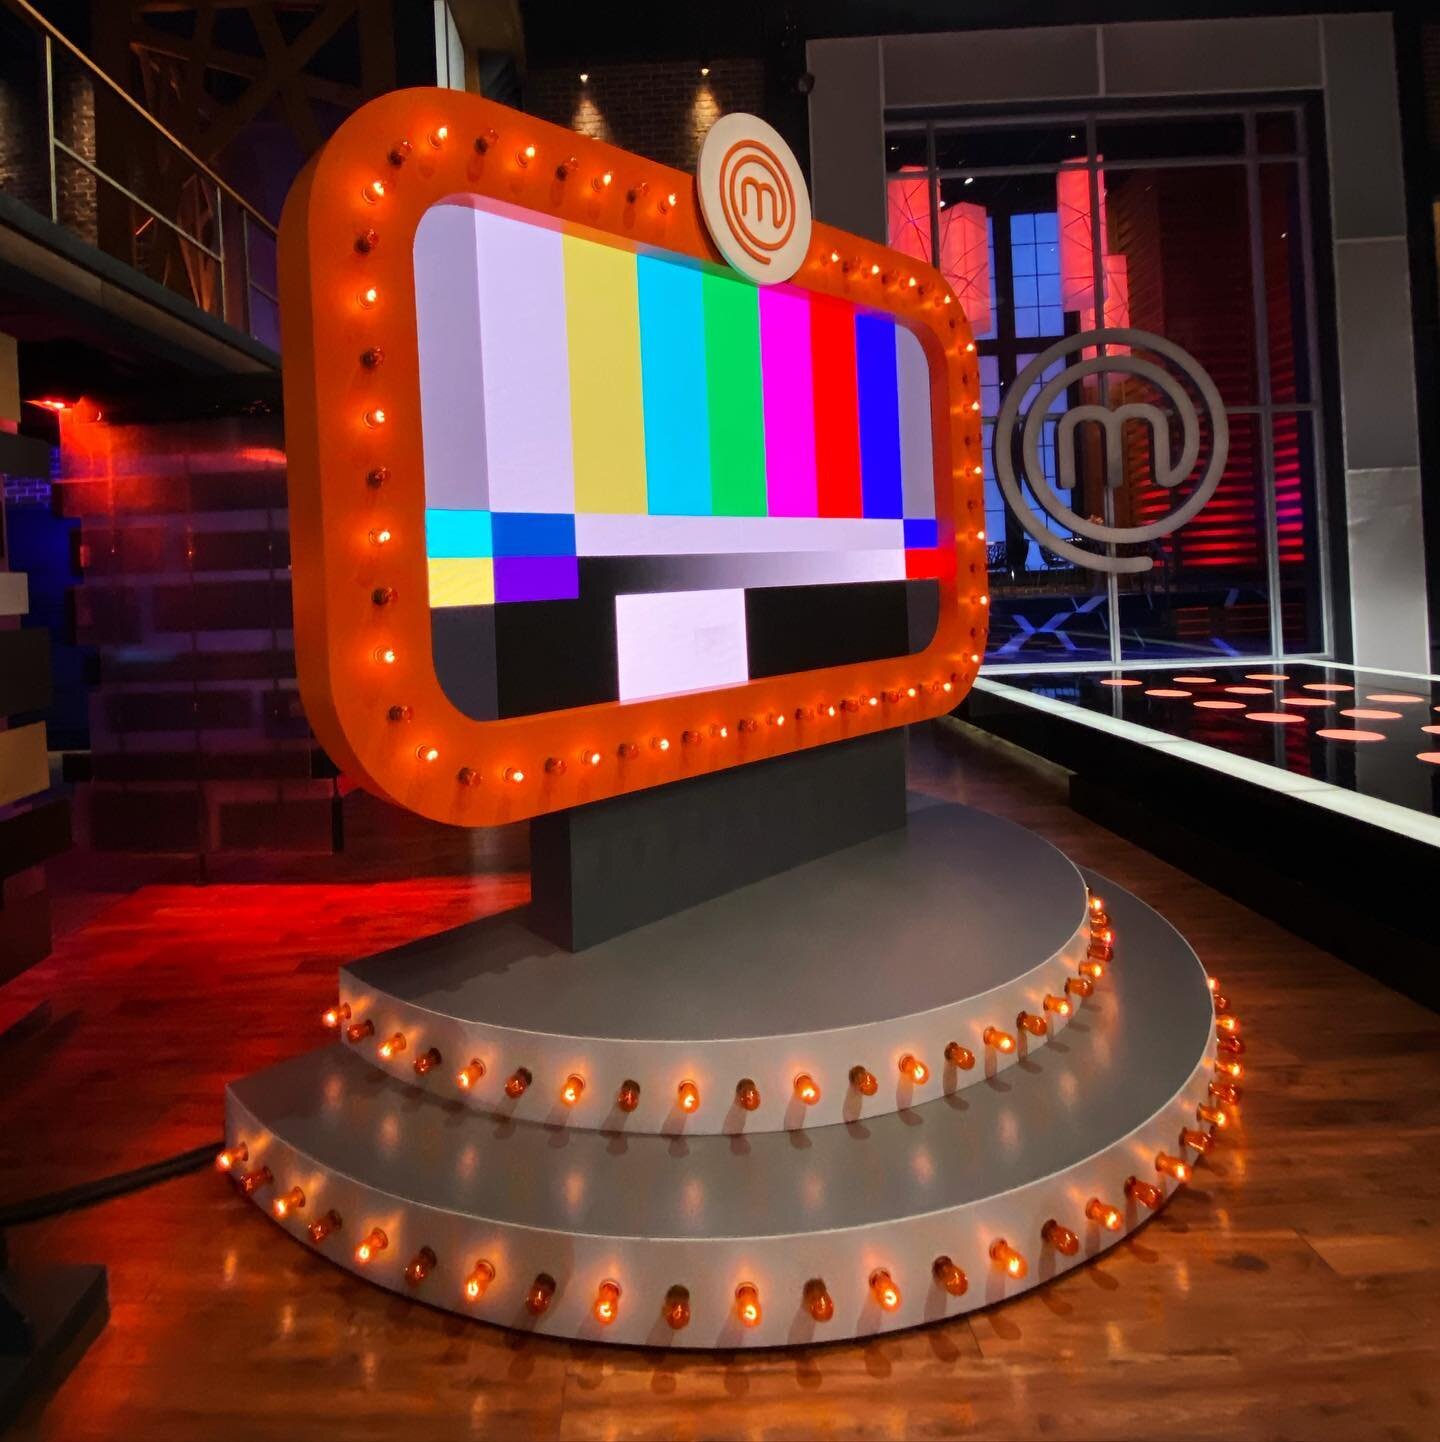 Did you catch the game show display we designed for @masterchefcda ?? 

LX by: @apexsoundandlight